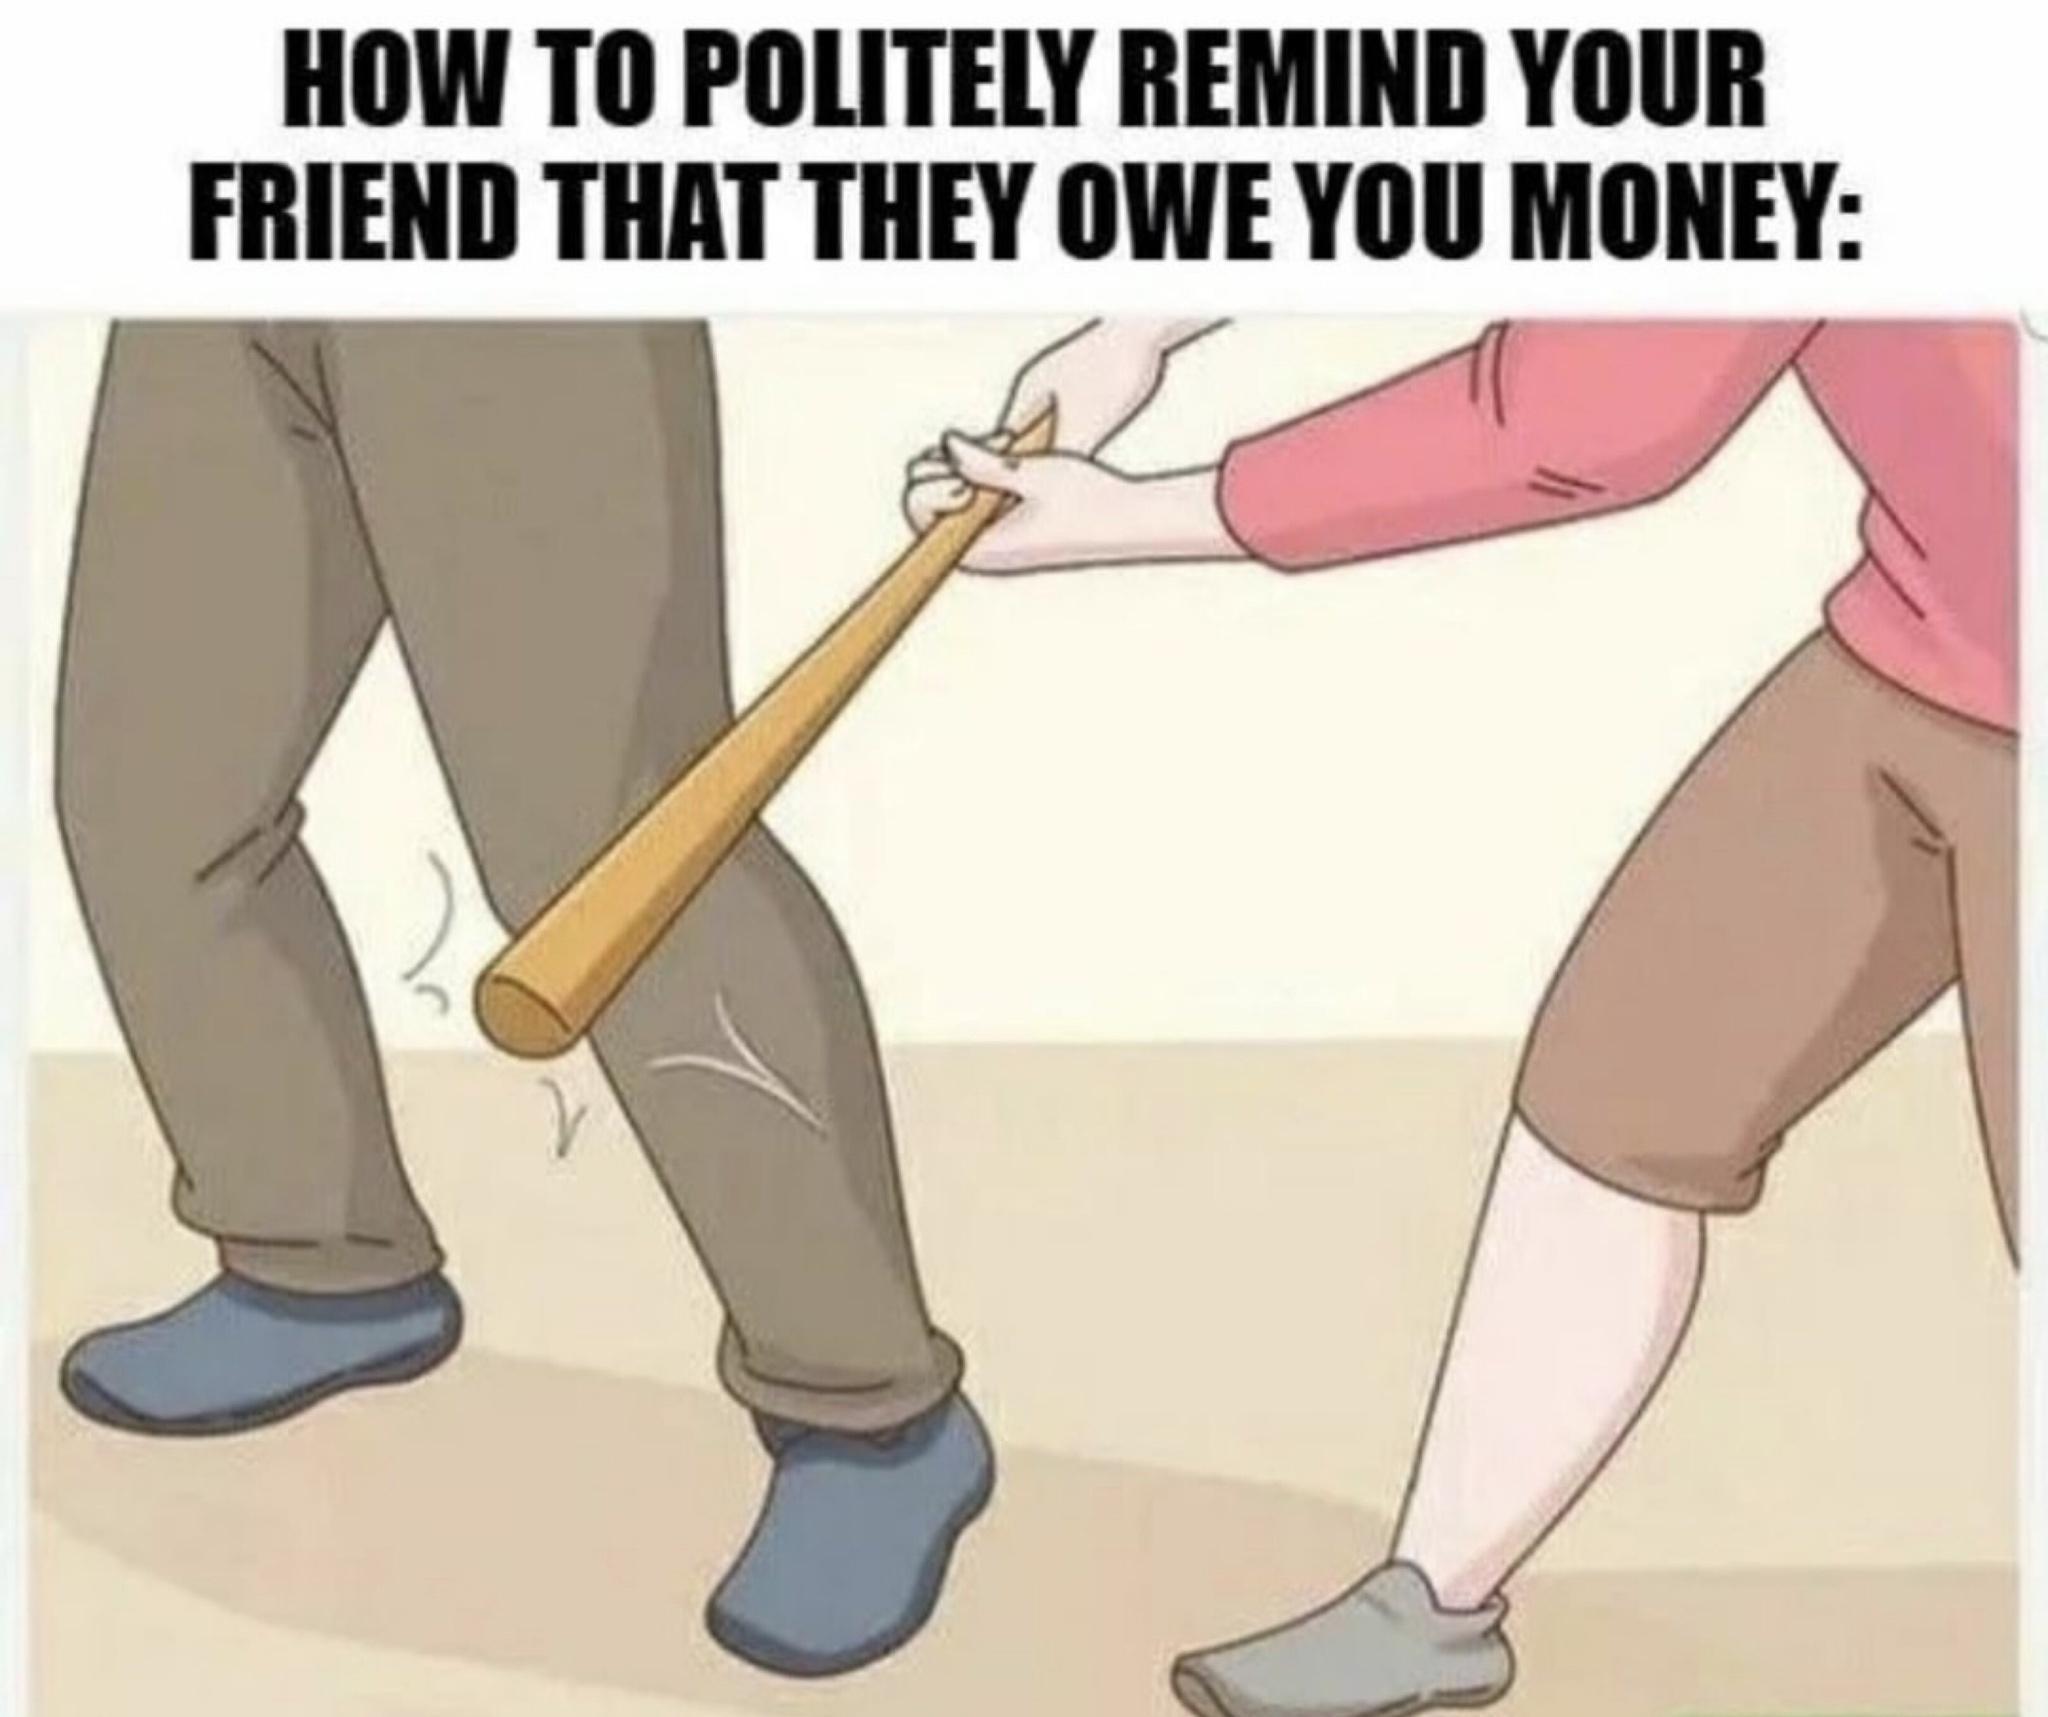 fresh memes - funny memes - politely remind your friend that they owe you money - How To Politely Remind Your Friend That They Owe You Money